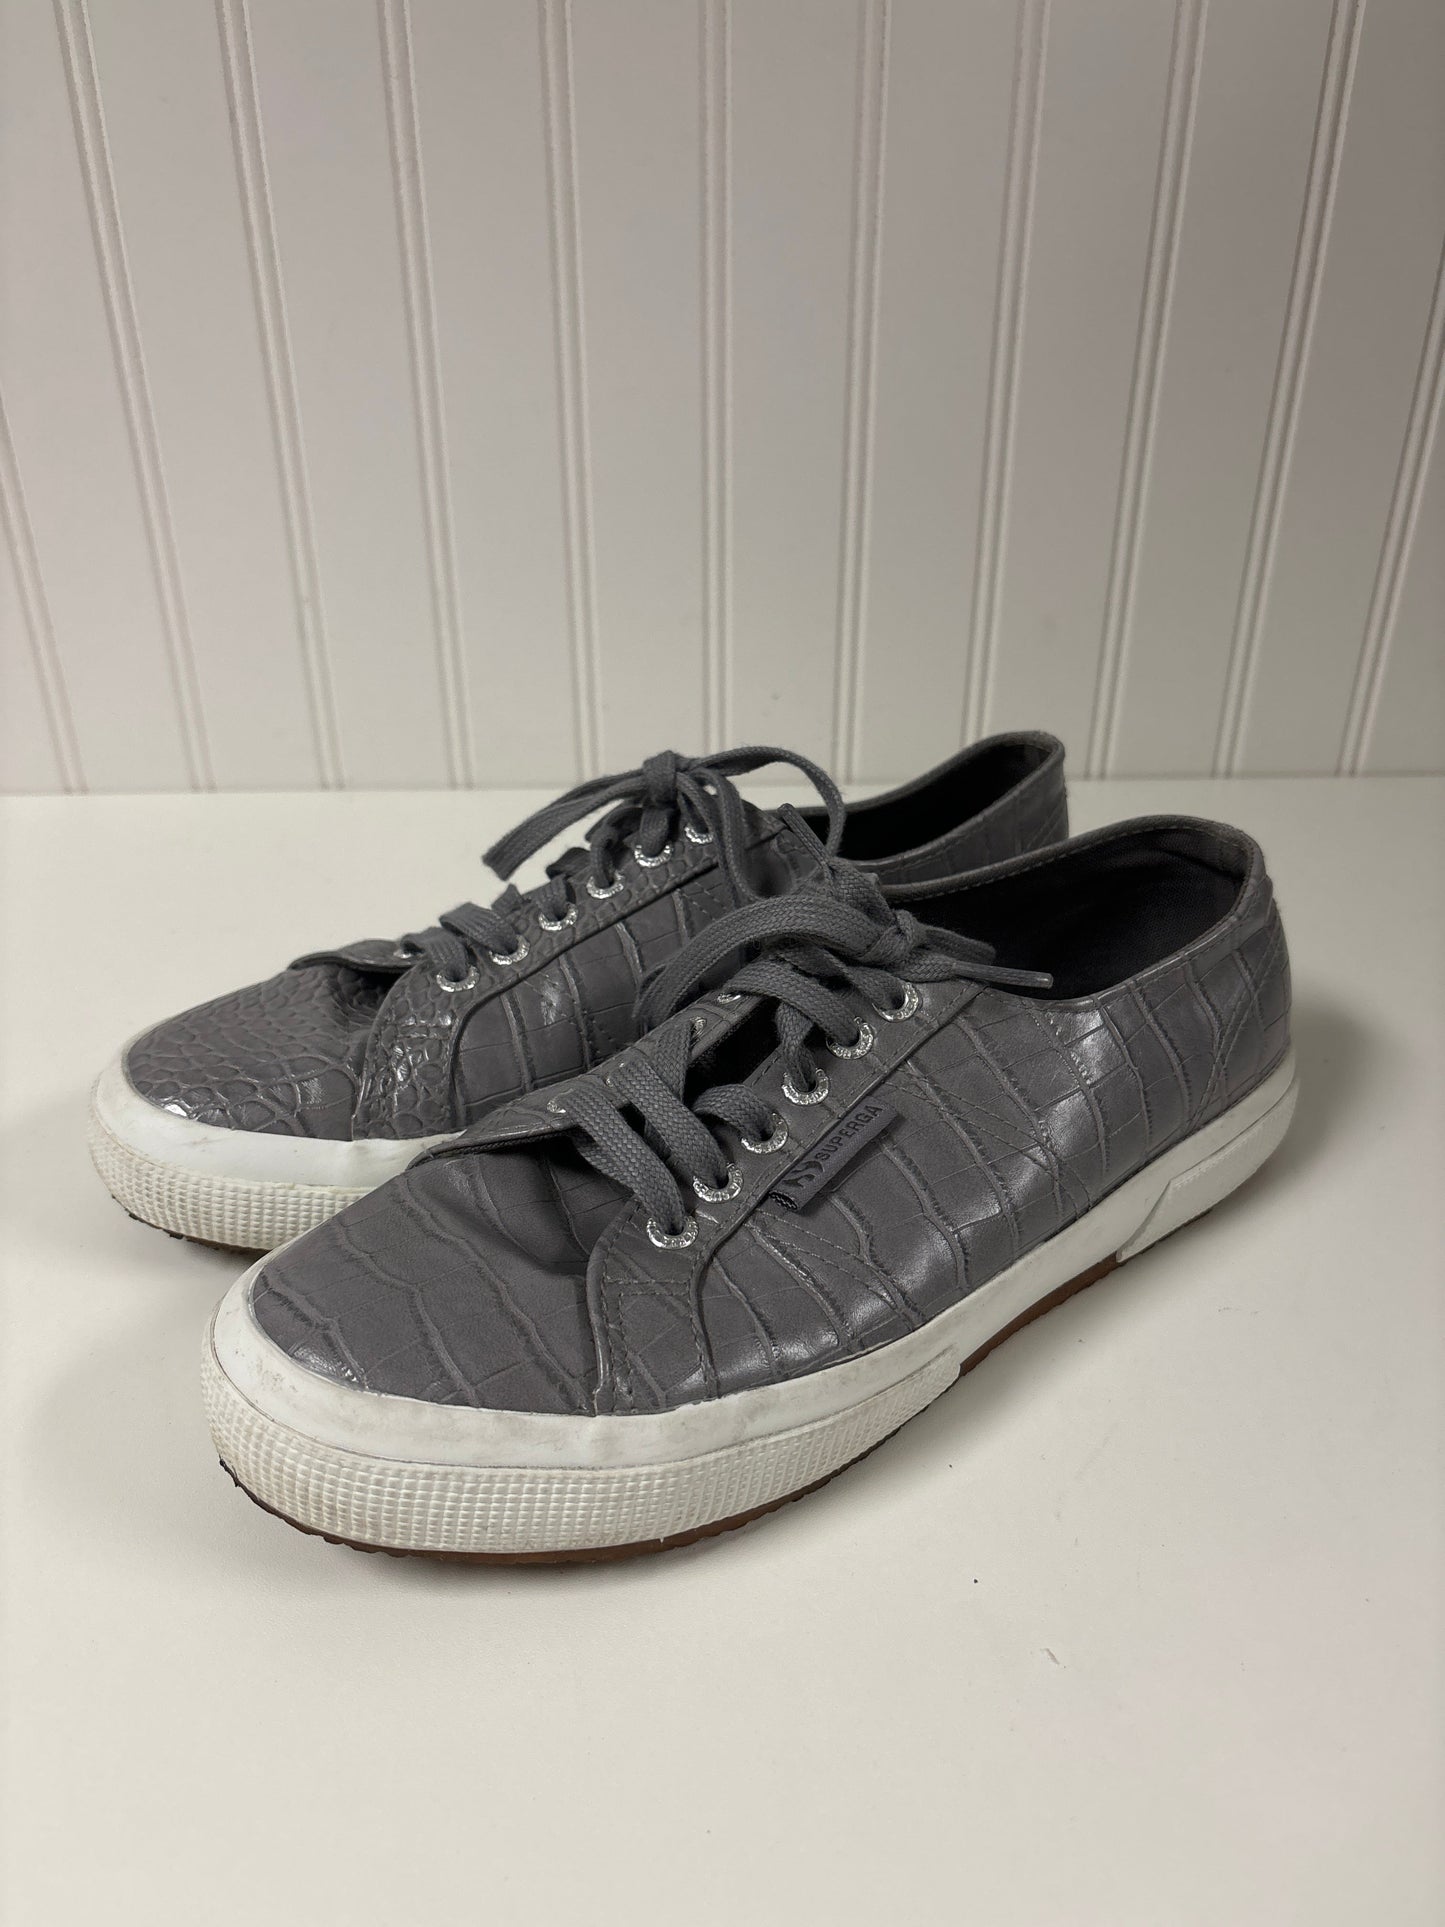 Grey Shoes Sneakers Superga, Size 9